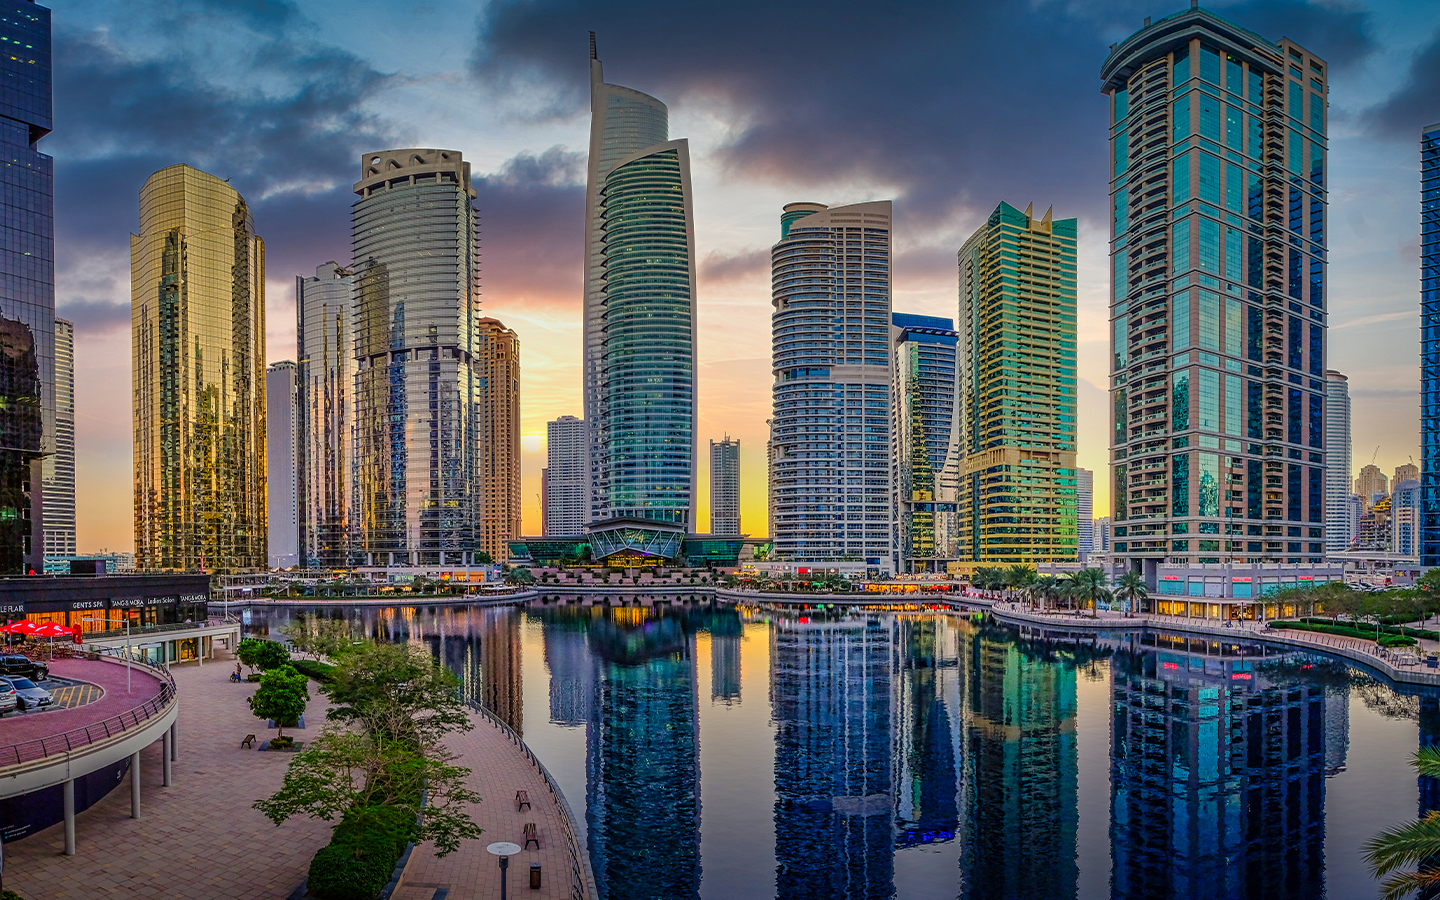 JLT is known for its luxurious properties